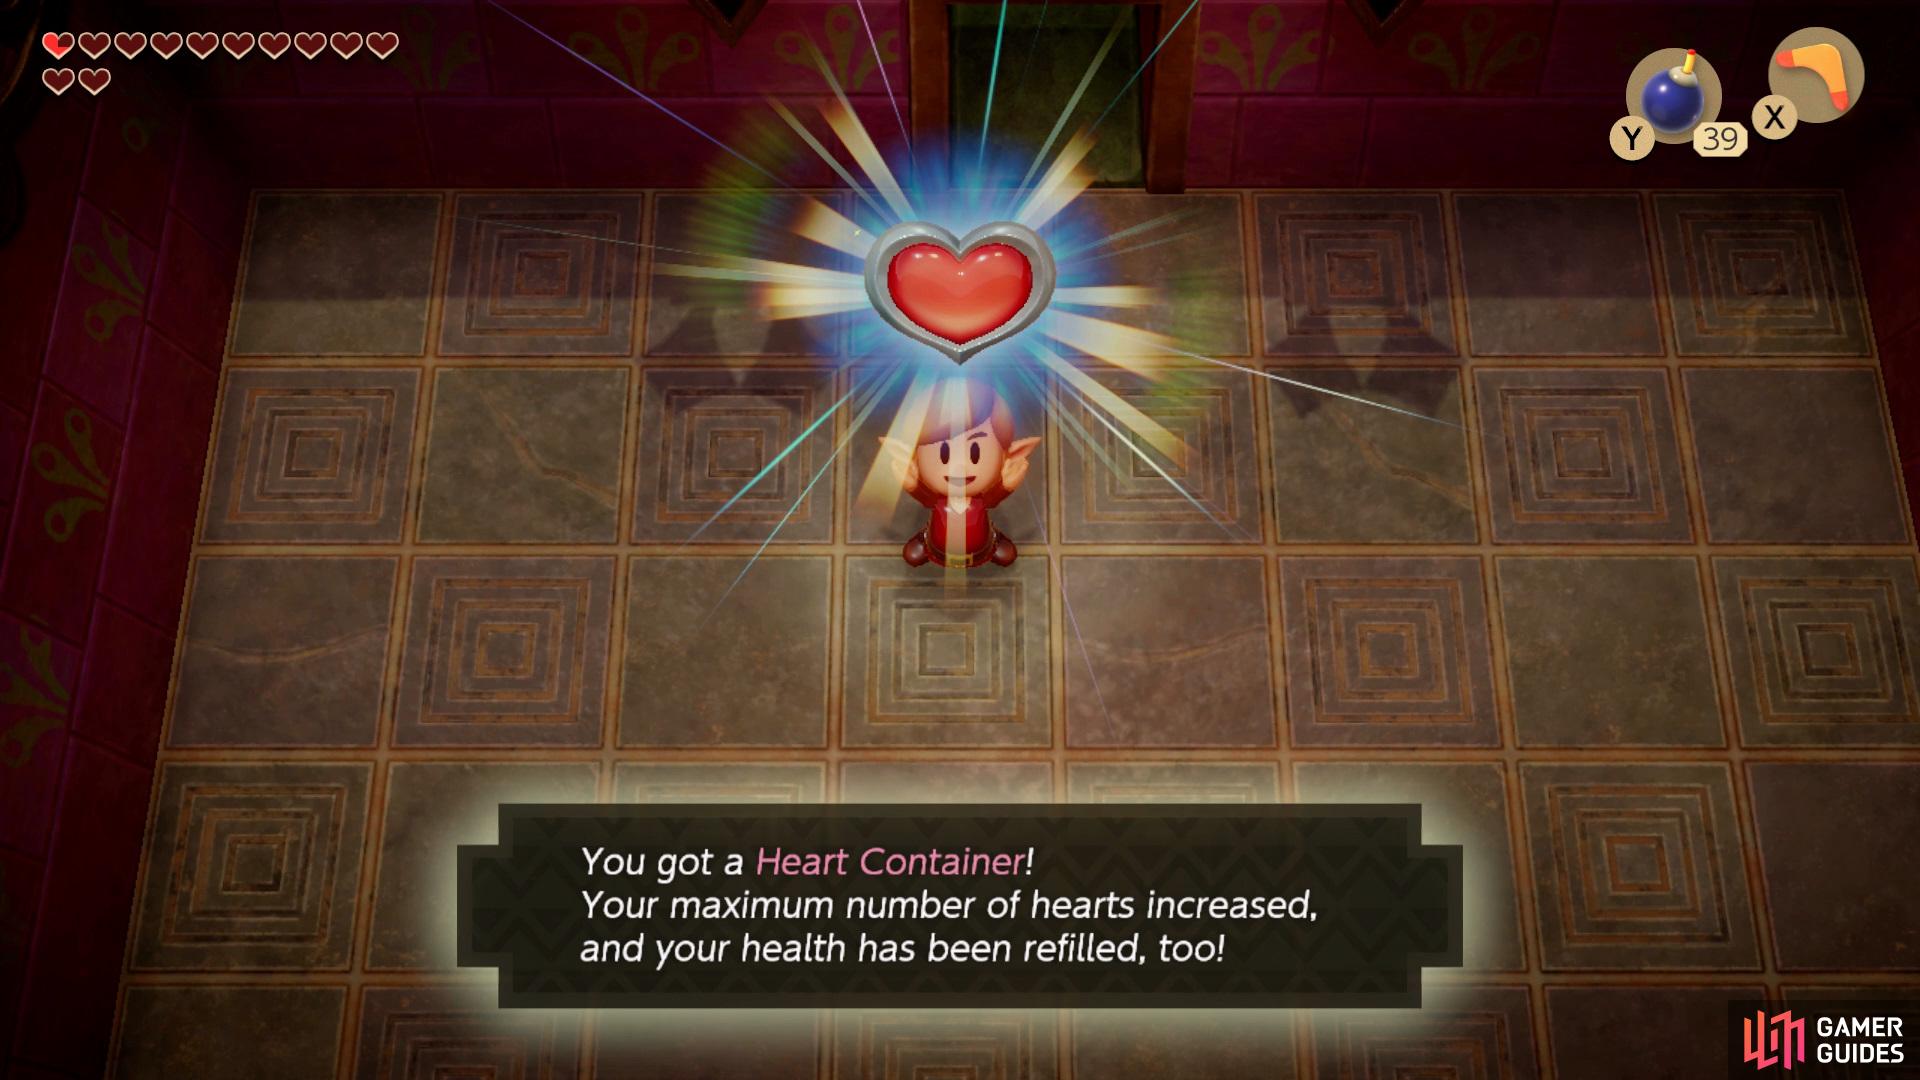 now you've killed Facade, collect the Heart Container from the floor.